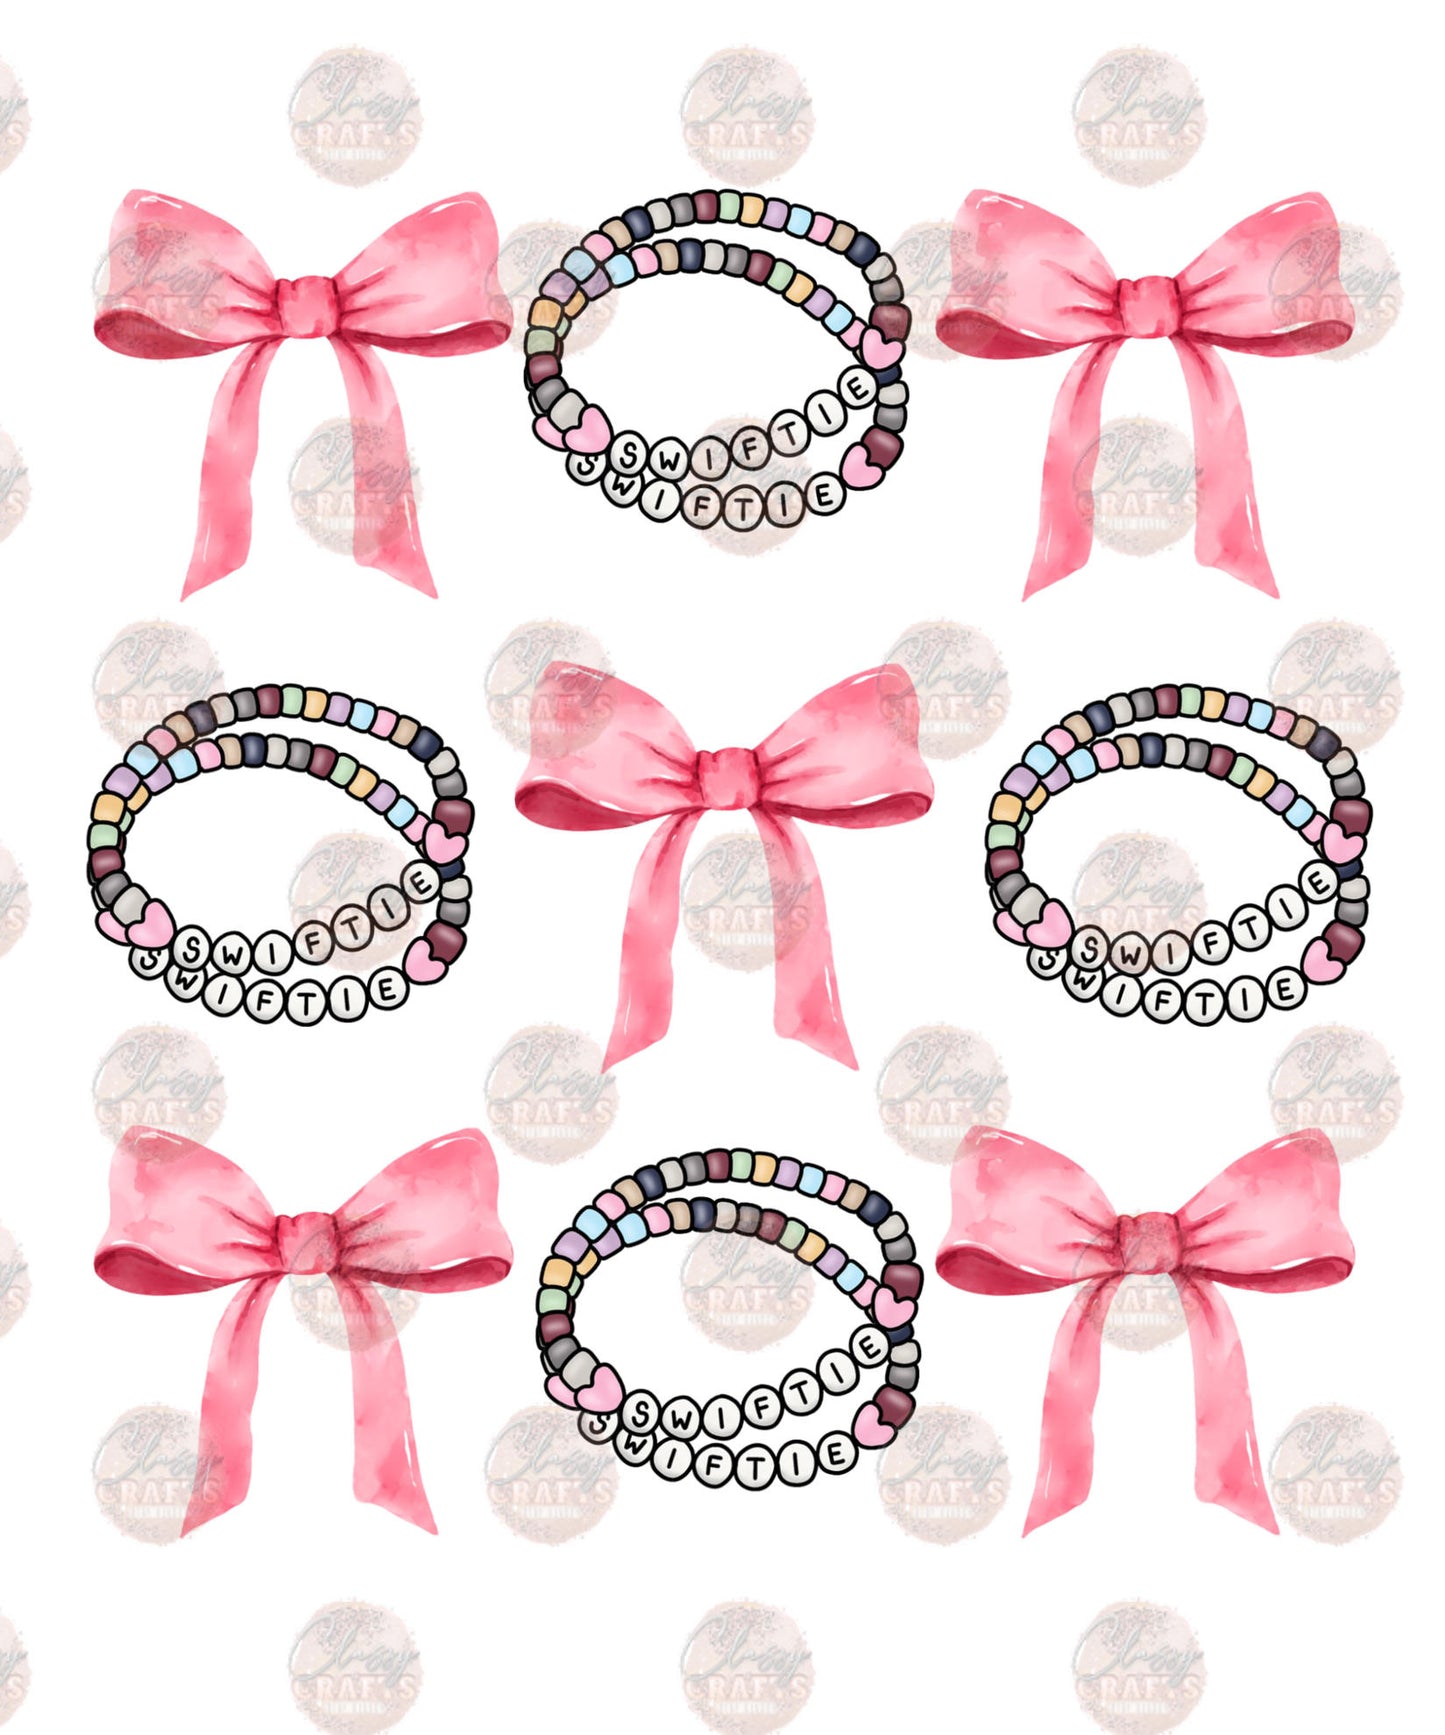 T.S. Bracelets and Bows Transfer